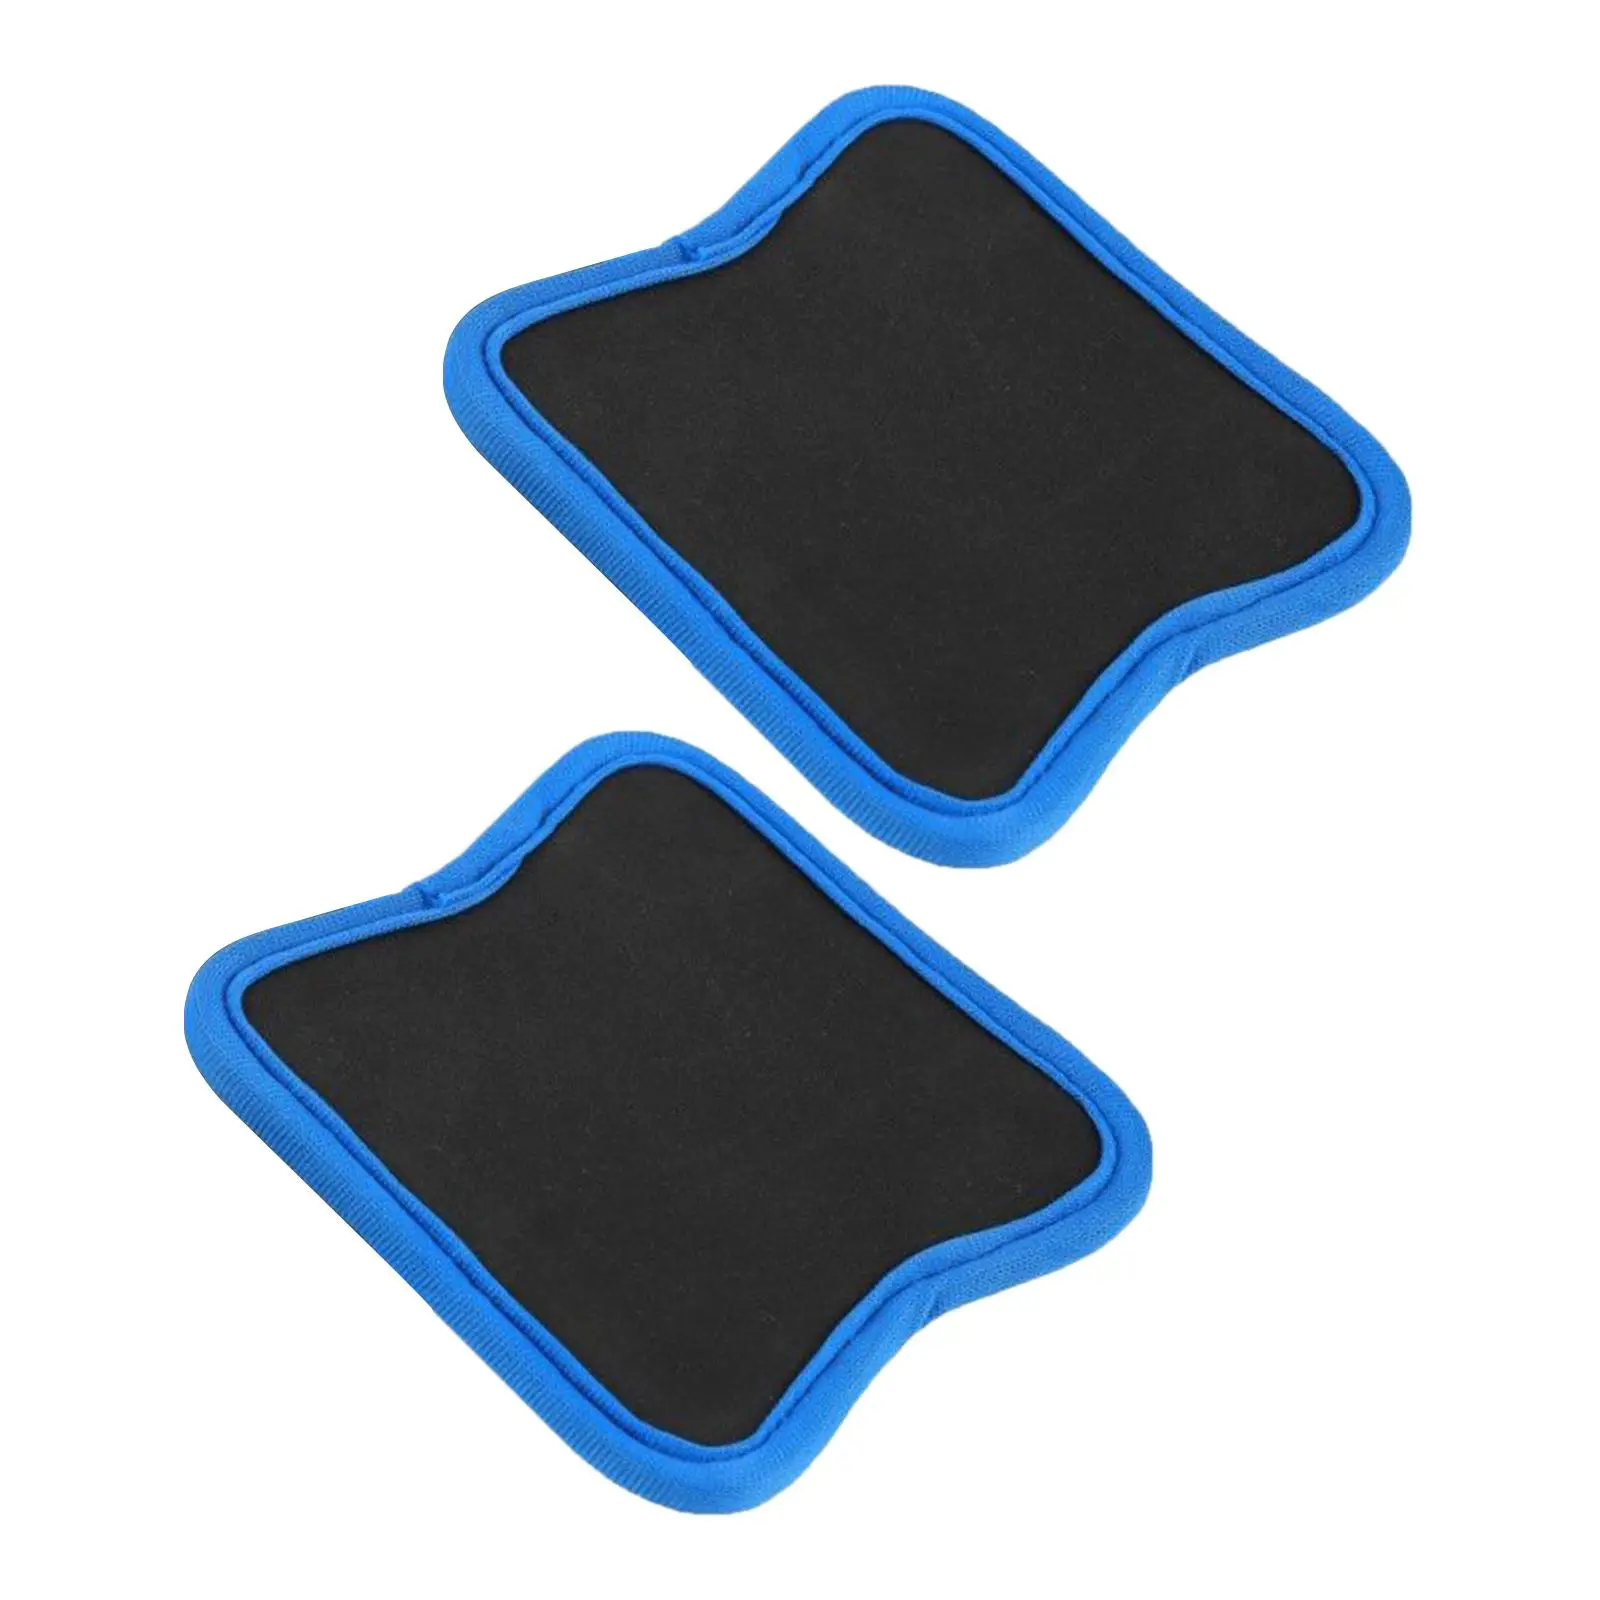 2 Pack Gym Grip Pads Protector No Sweaty Hands Palm Protection Comfort Weightlifting Grip Pad for Sports Training Women Men